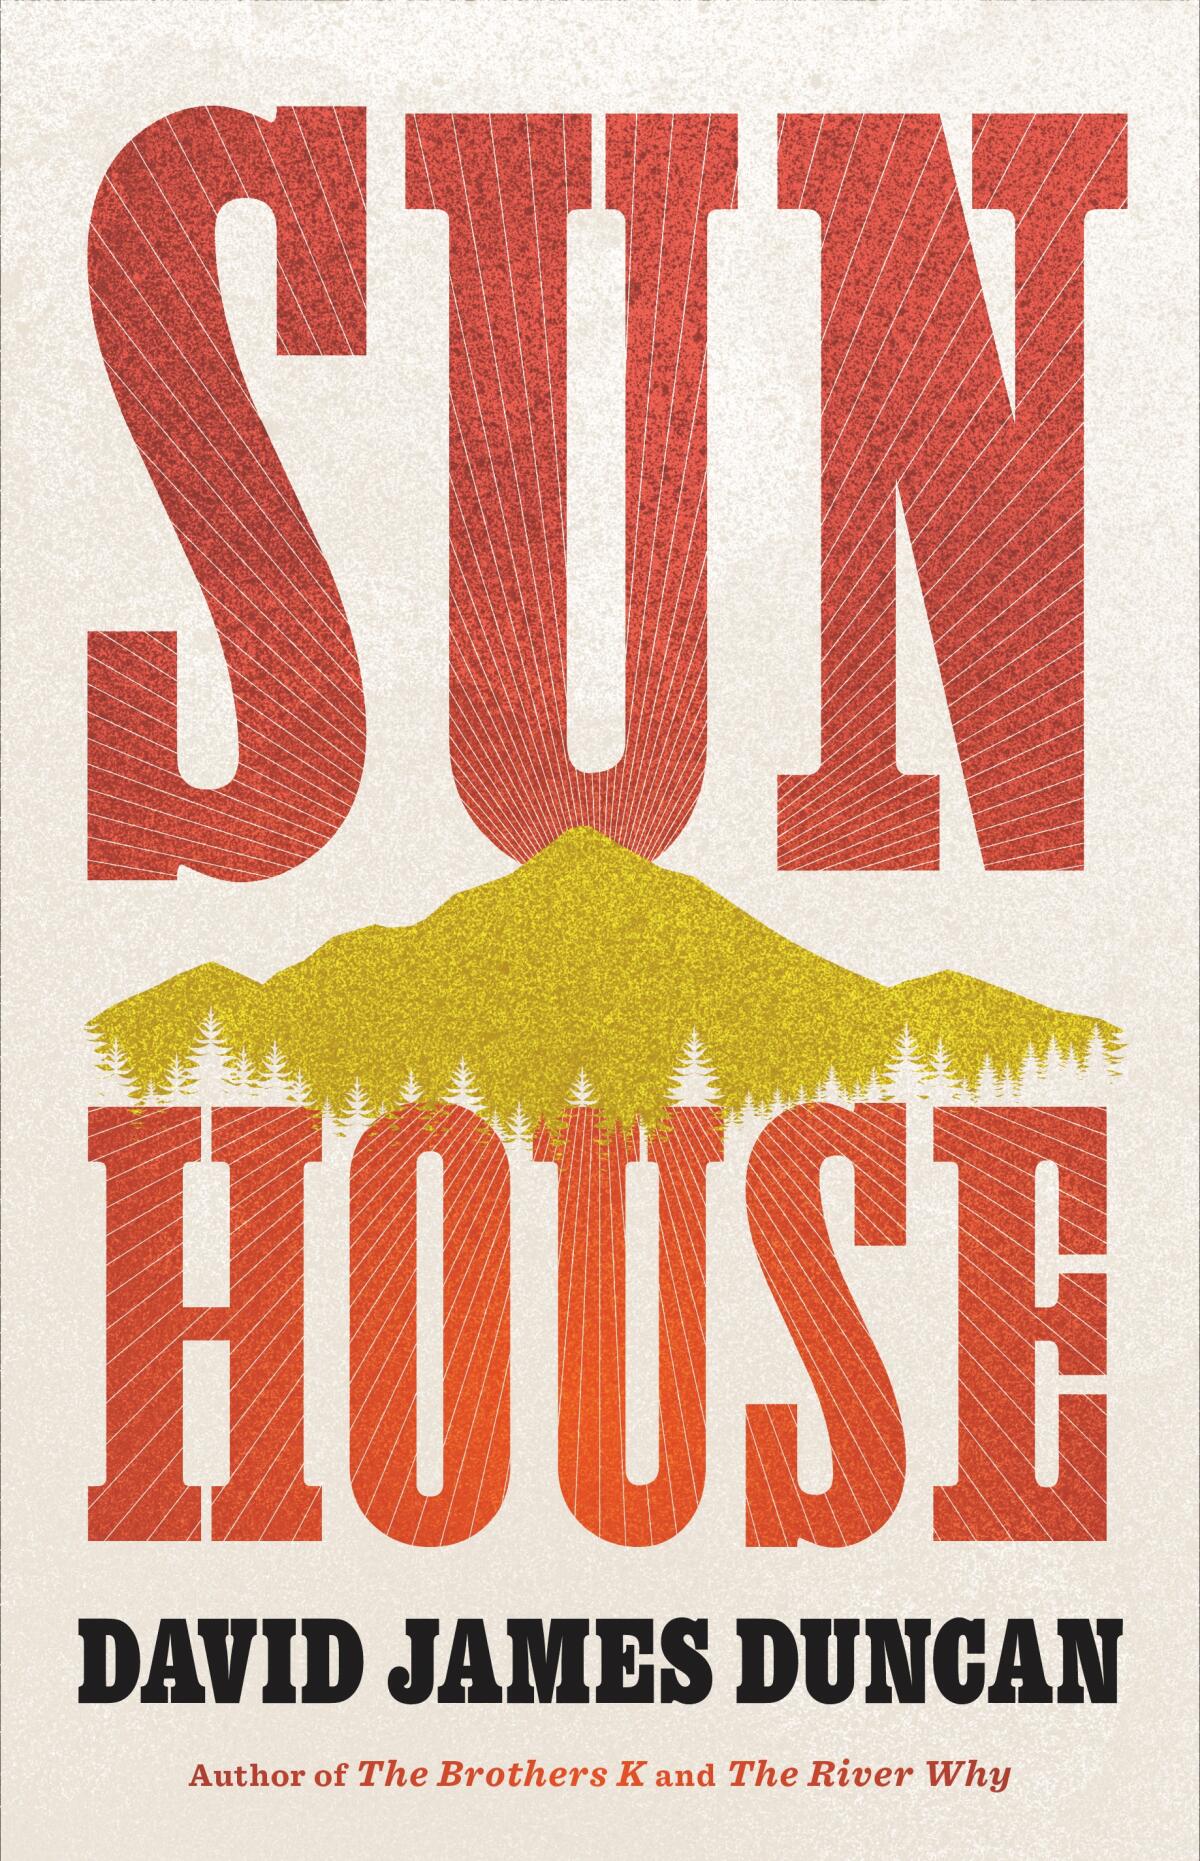 The cover of "Sun House," with a mountain rising between the words of the title.